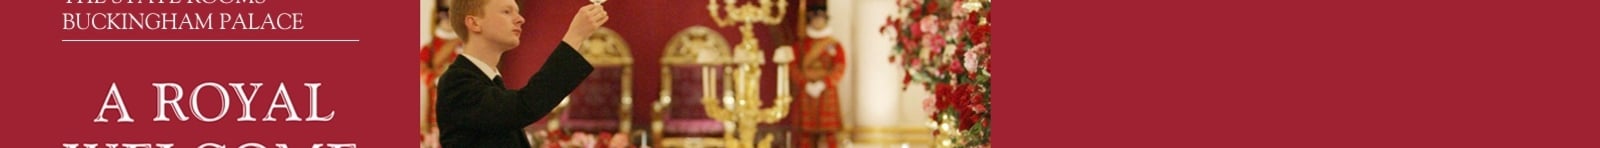 Footman checking preparations for a State Banquet at Buckingham Palace